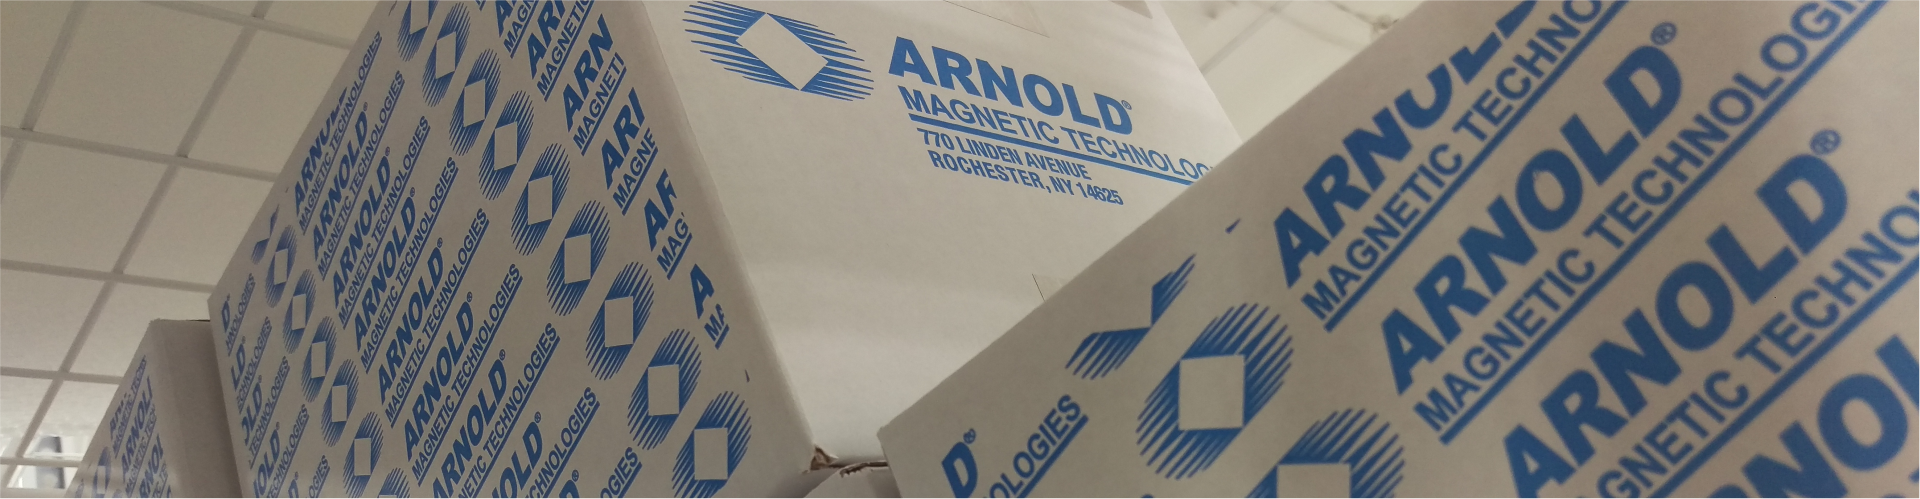 Arnold Magnetic Technologies -